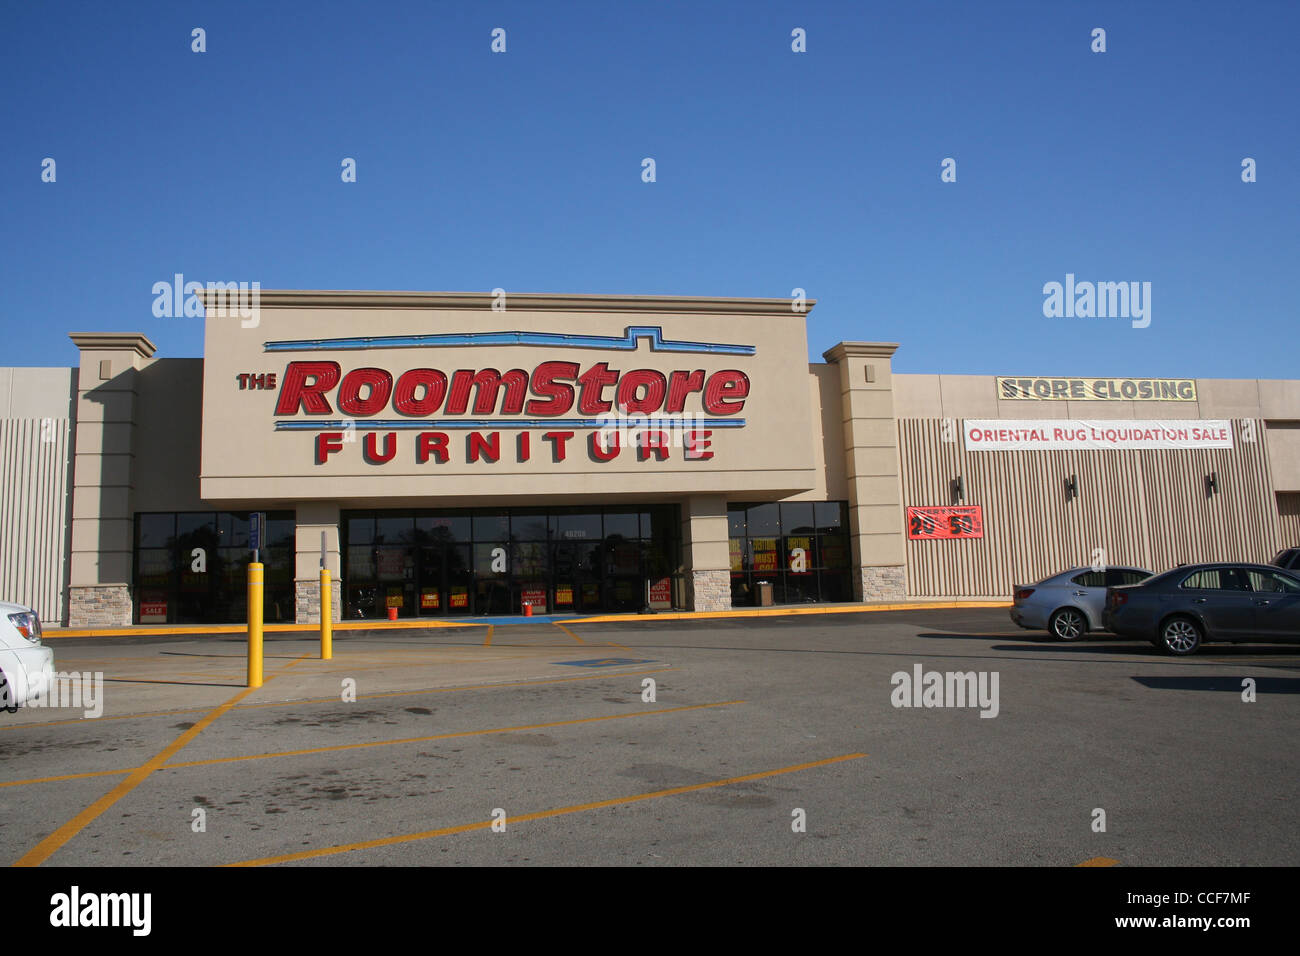 The Roomstore Furniture Store Closing Sale - Tyler, TX - January 2012 Stock Photo